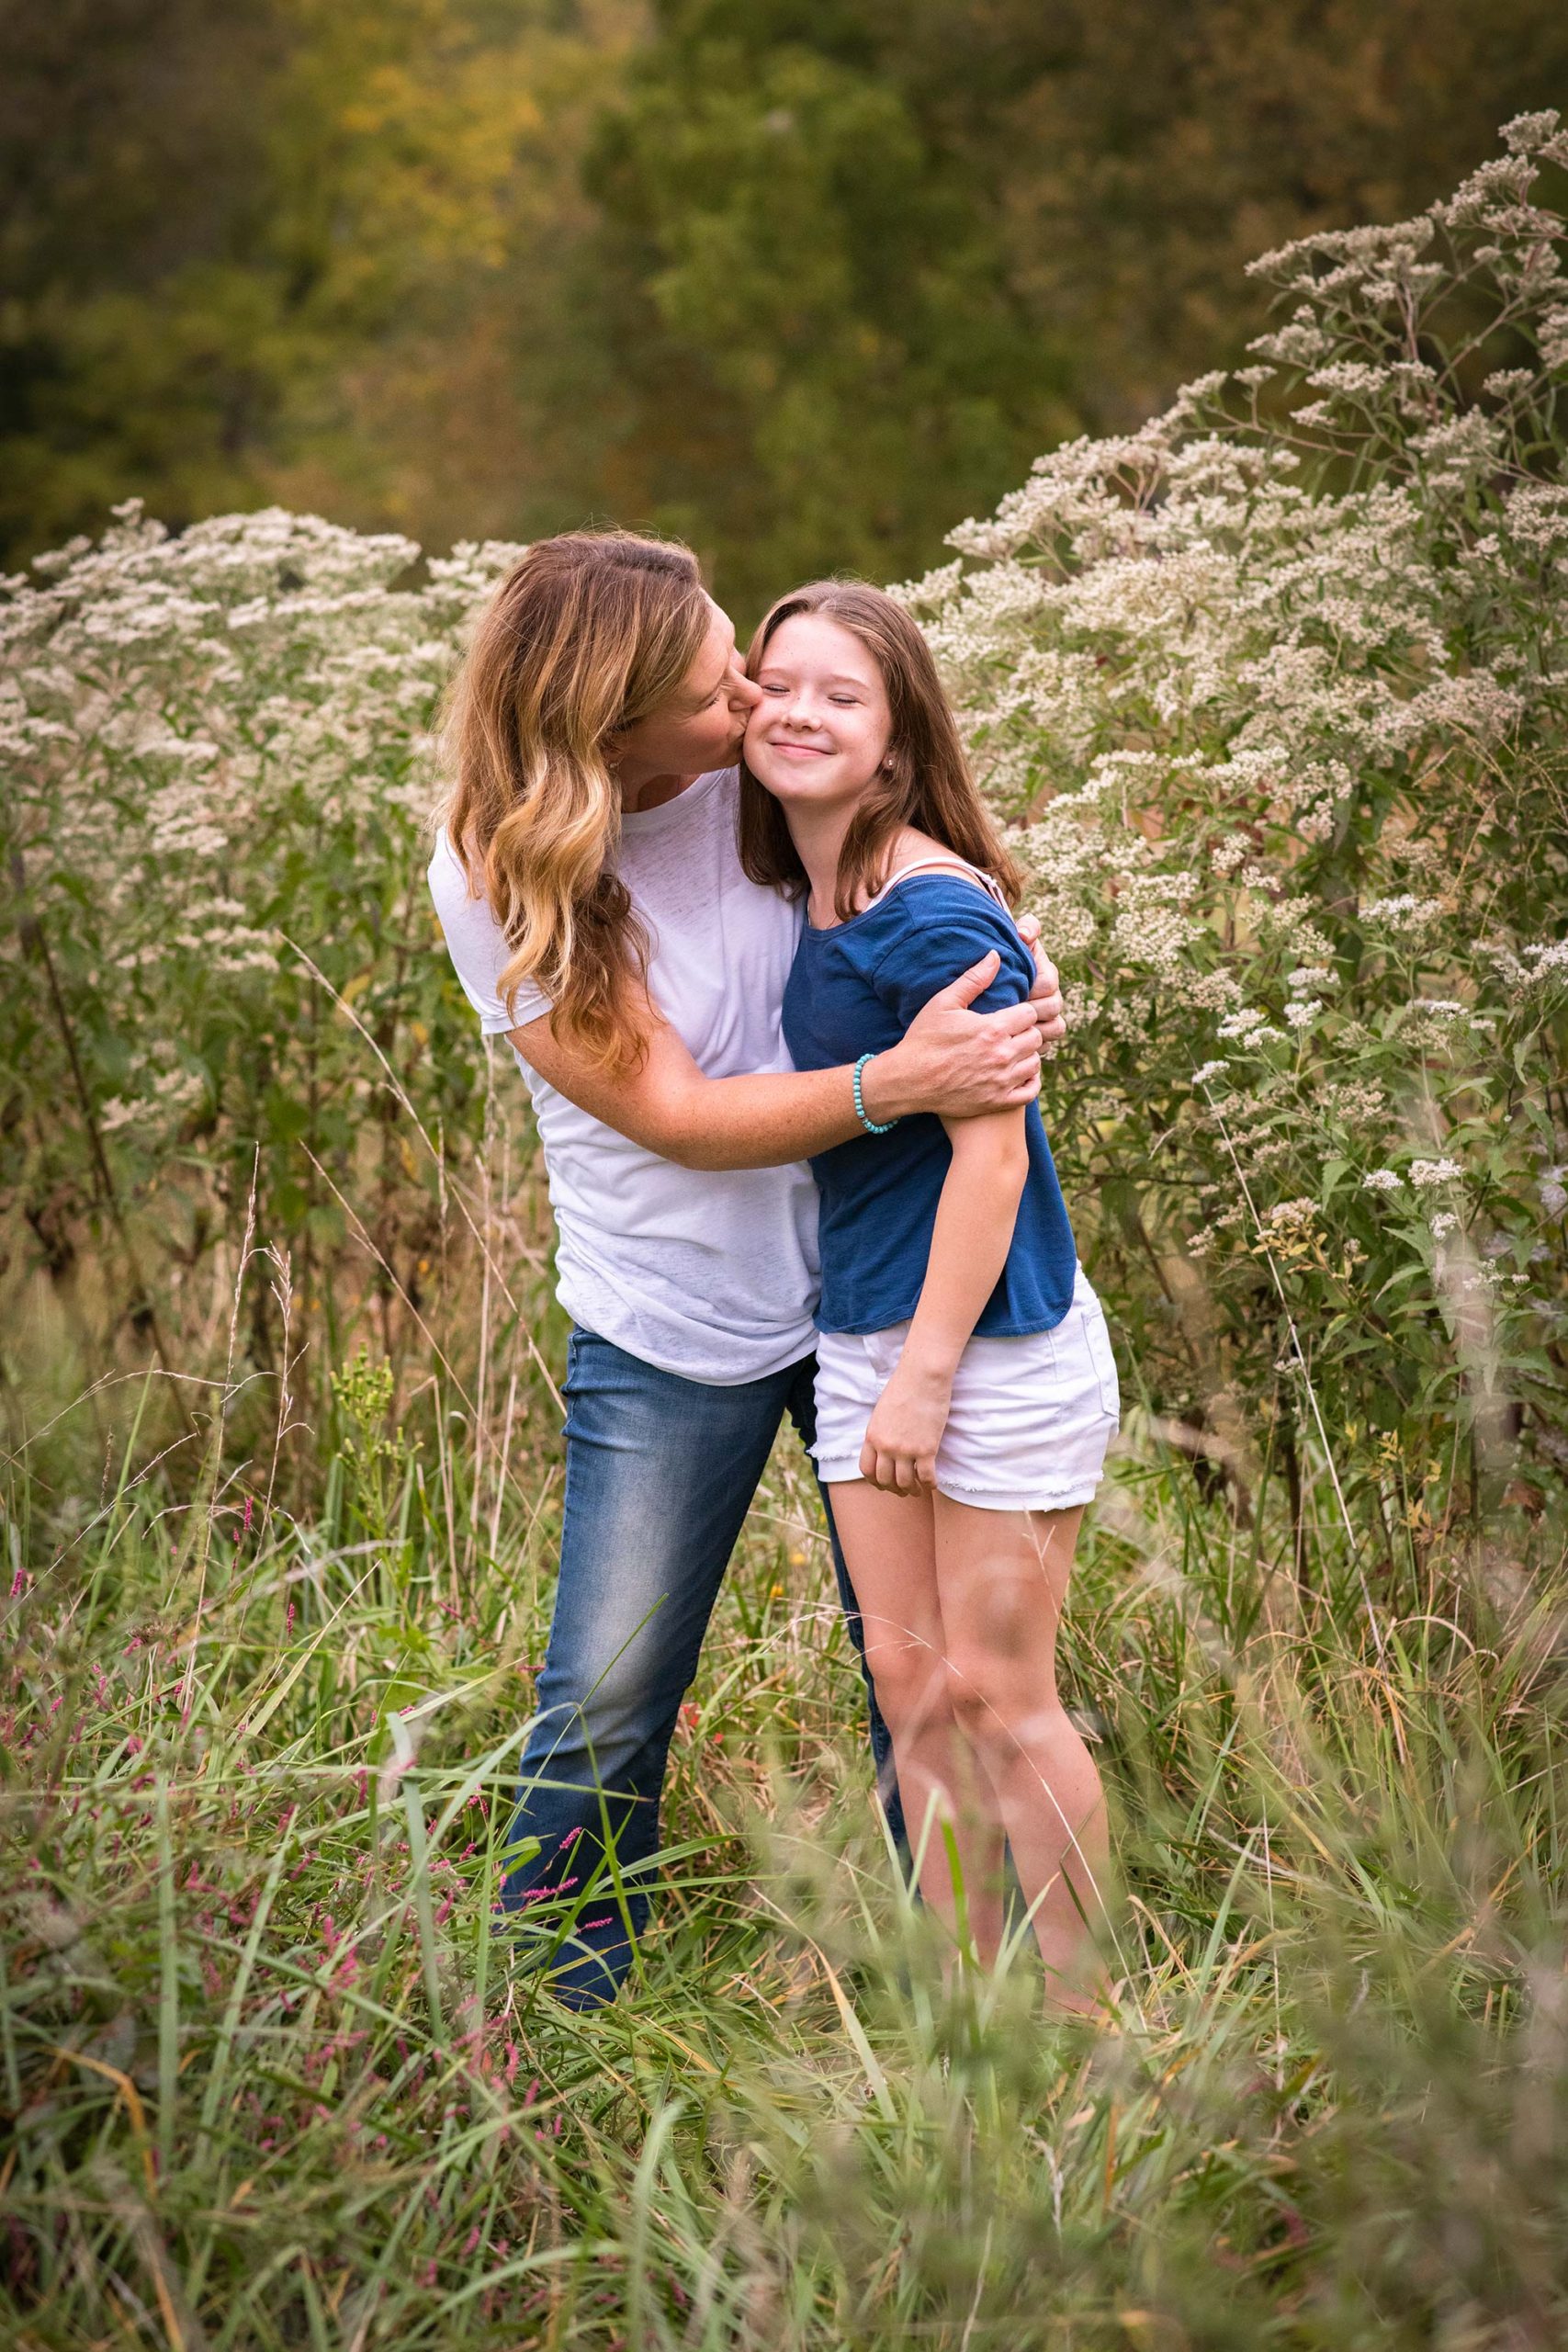 Mom gives tween daughter a kiss on the cheek in a field of flowers.